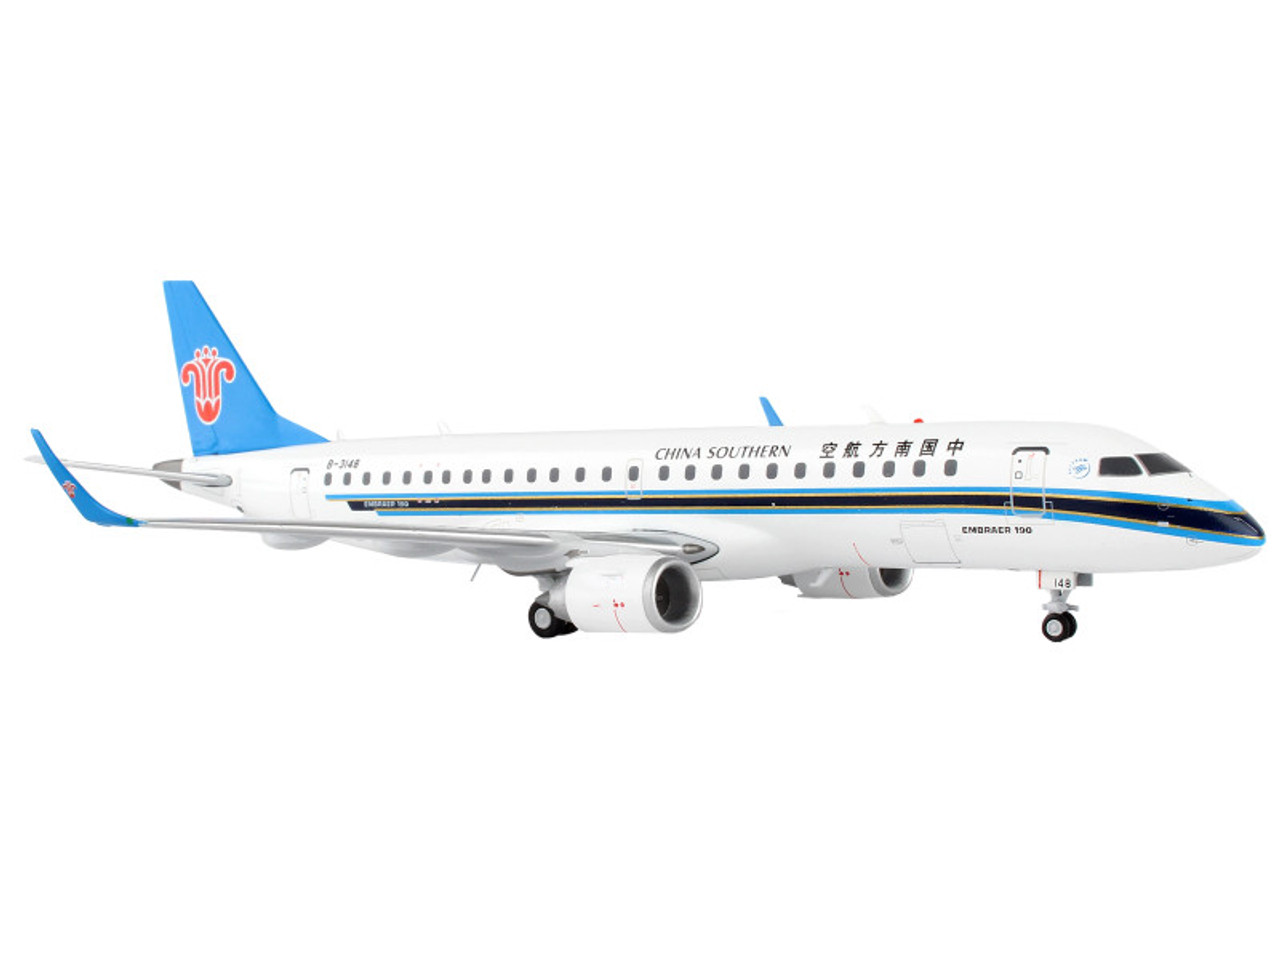 Embraer ERJ-190 Commercial Aircraft "China Southern Airlines" White with Black Stripes and Blue Tail "Gemini 200" Series 1/200 Diecast Model Airplane by GeminiJets